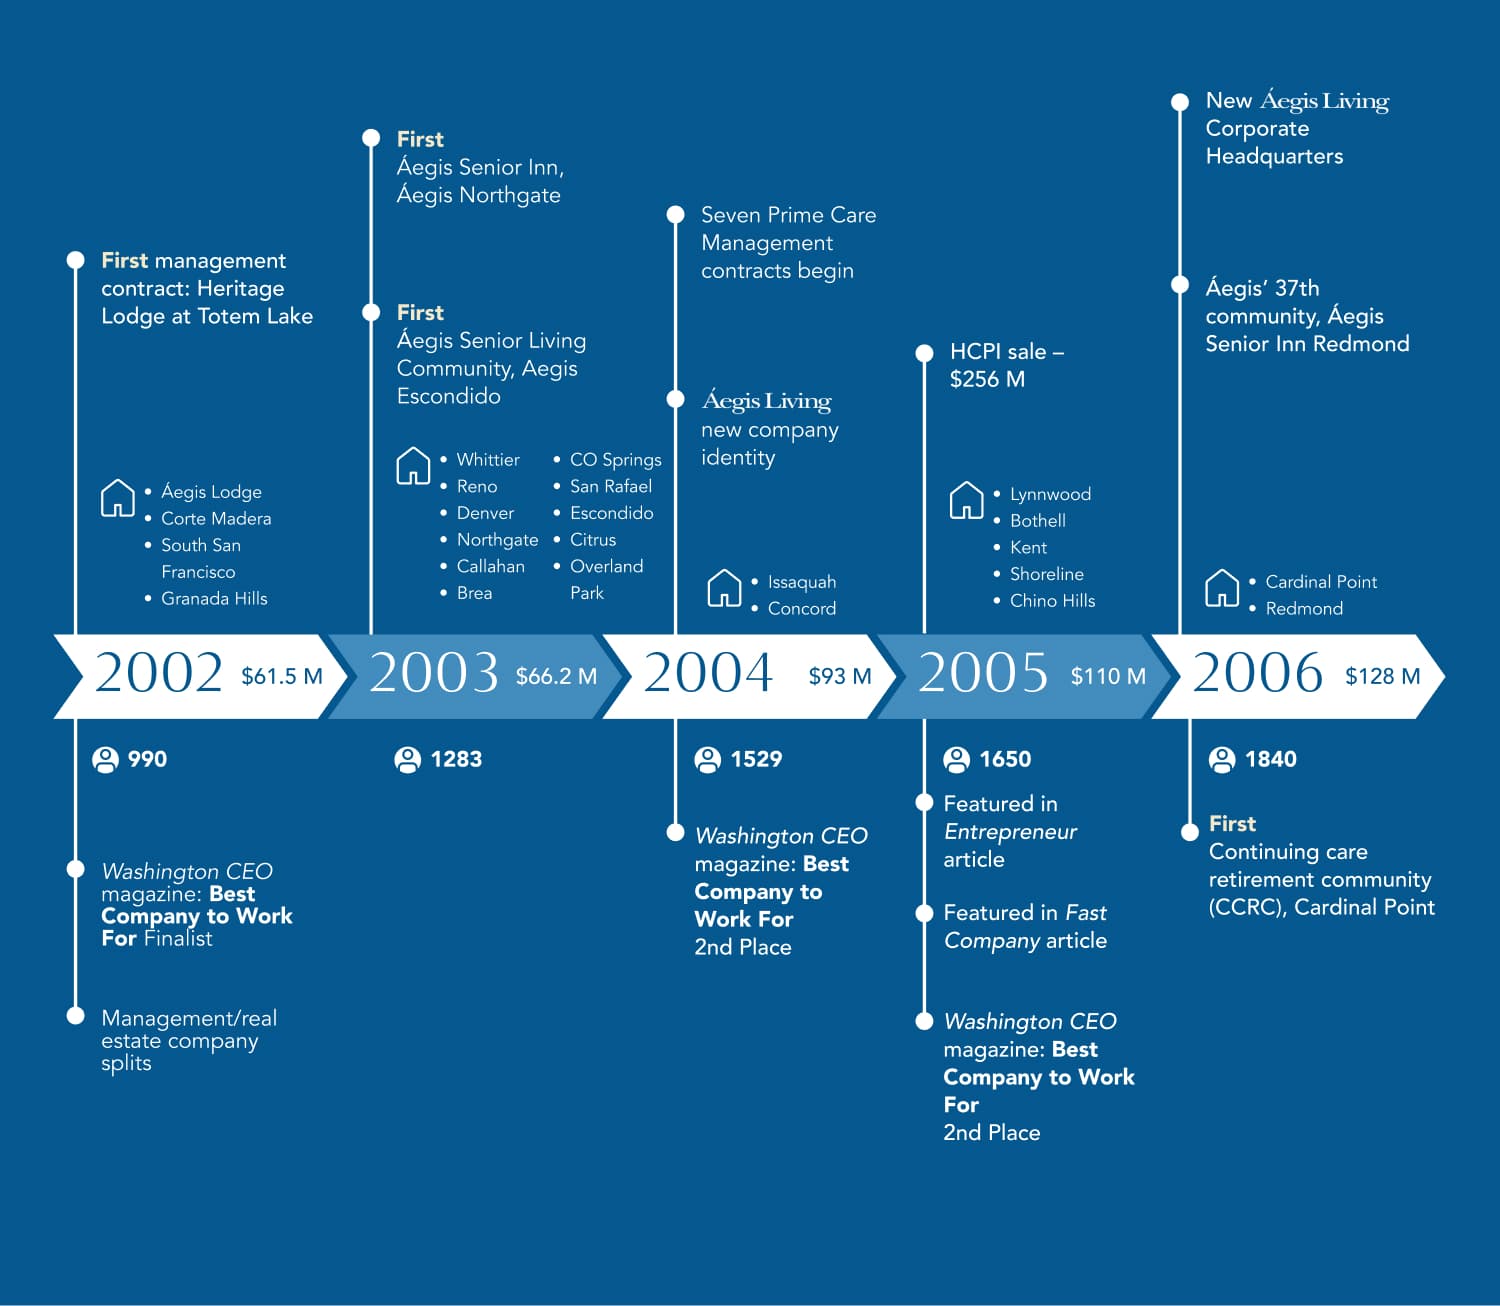 A timeline of Aegis Living’s history from 2002–2006